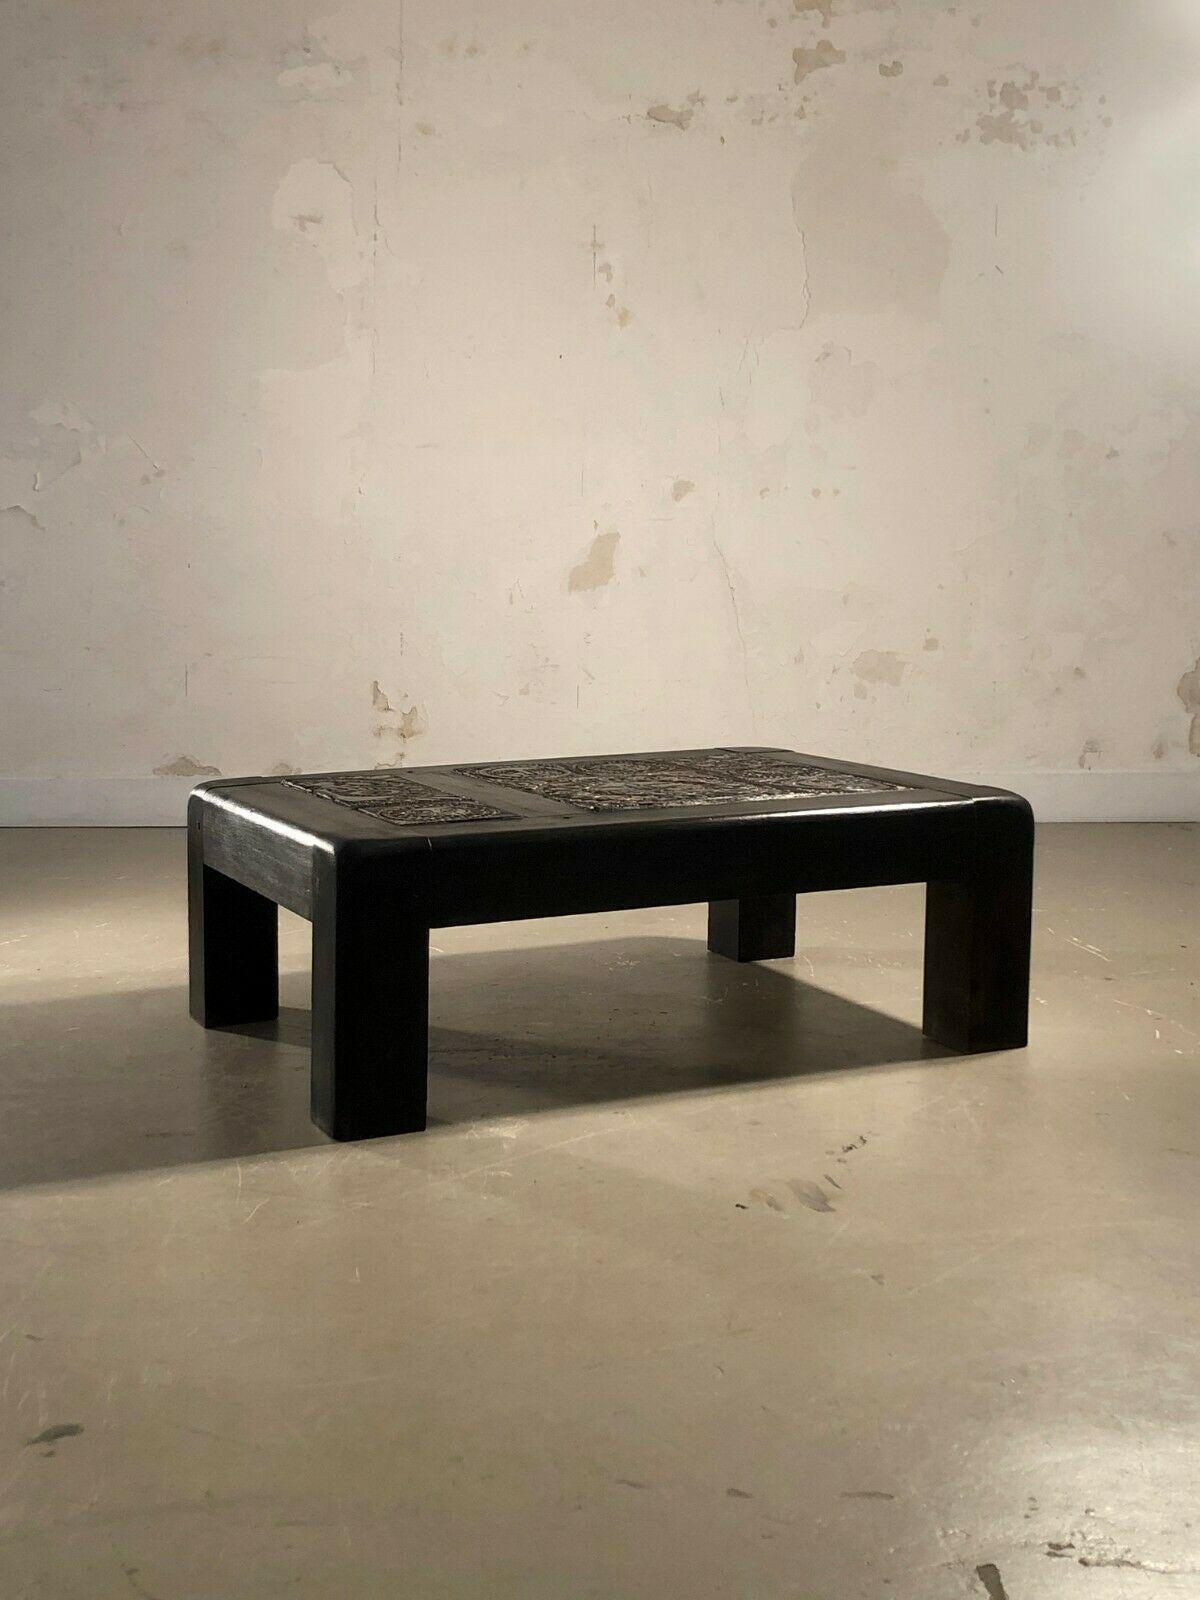 Wood A Ceramic COFFEE TABLE by ROLAND ZOBEL, LES CYCLADES, VALLAURIS, France 1970 For Sale